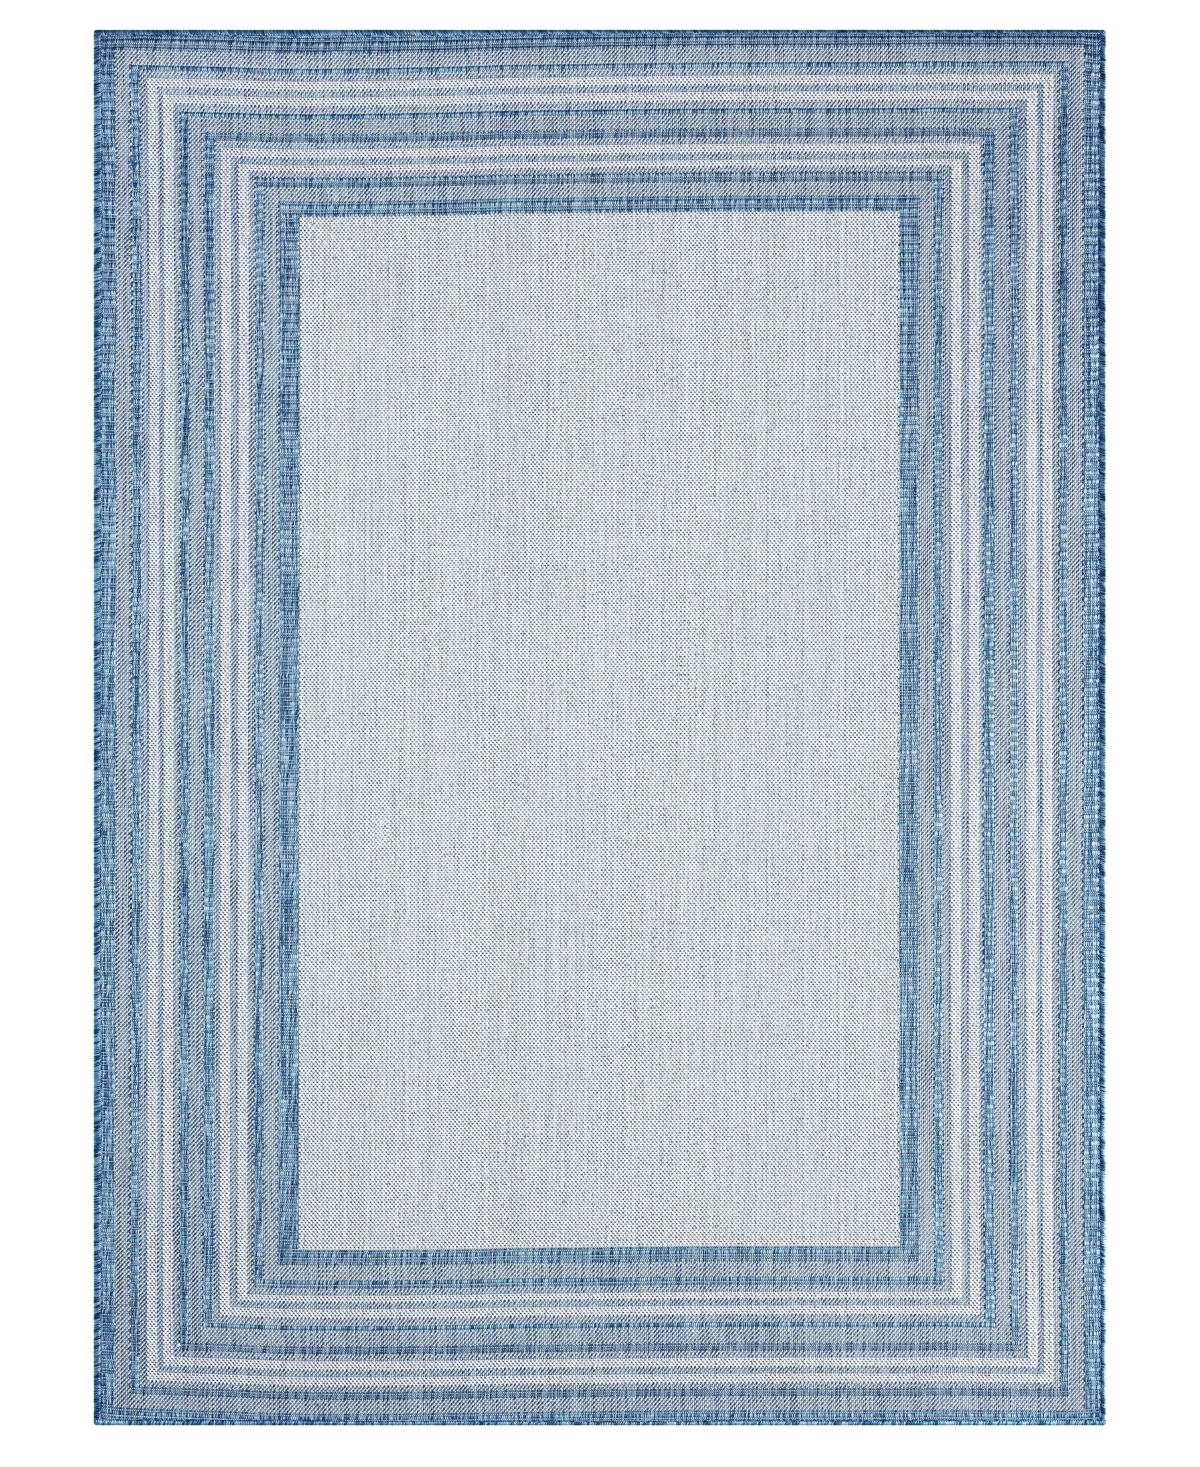 Nicole Miller Patio Country Layla 5'2" X 7'2" Outdoor Area Rug In Cream/blue